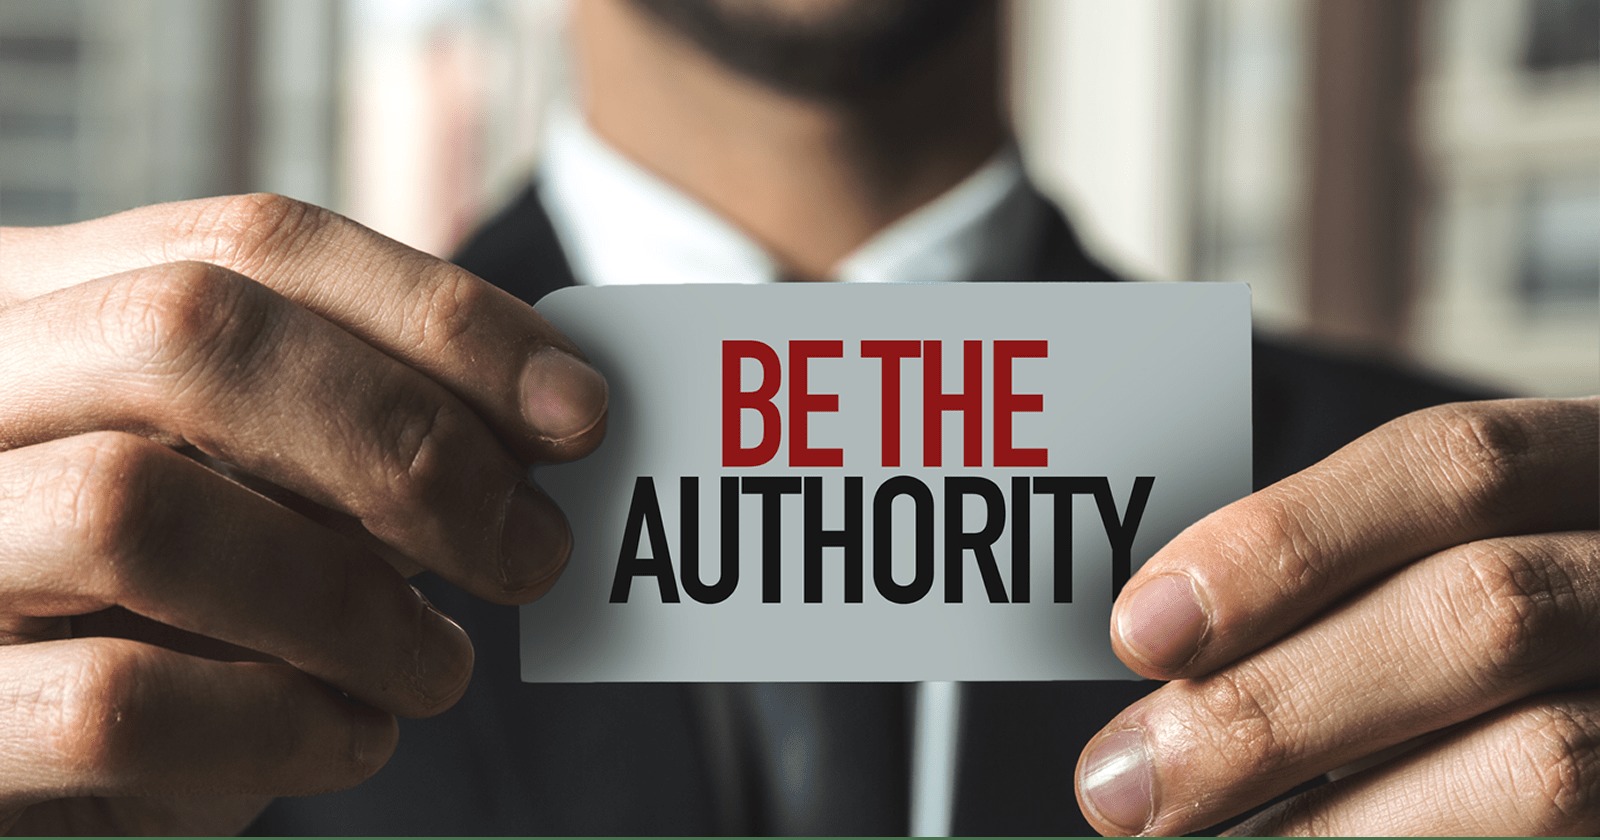 Lead the Way! Using Online Summits to Build Authority